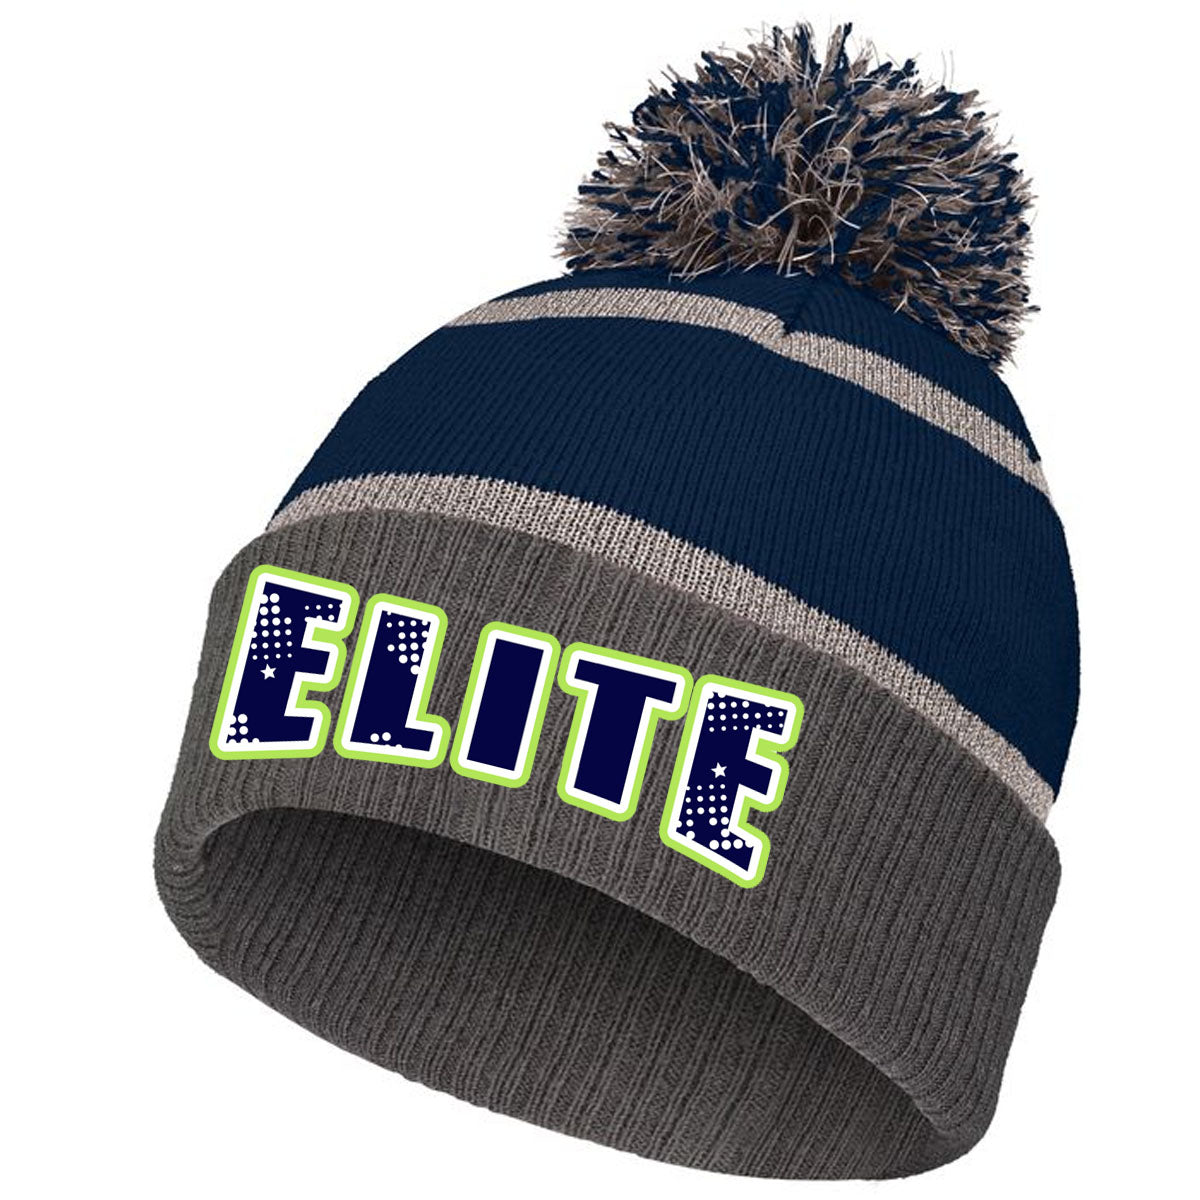 Elite - Elite Holloway Reflective Beanie (223816) - Navy/Carbon - Southern Grace Creations